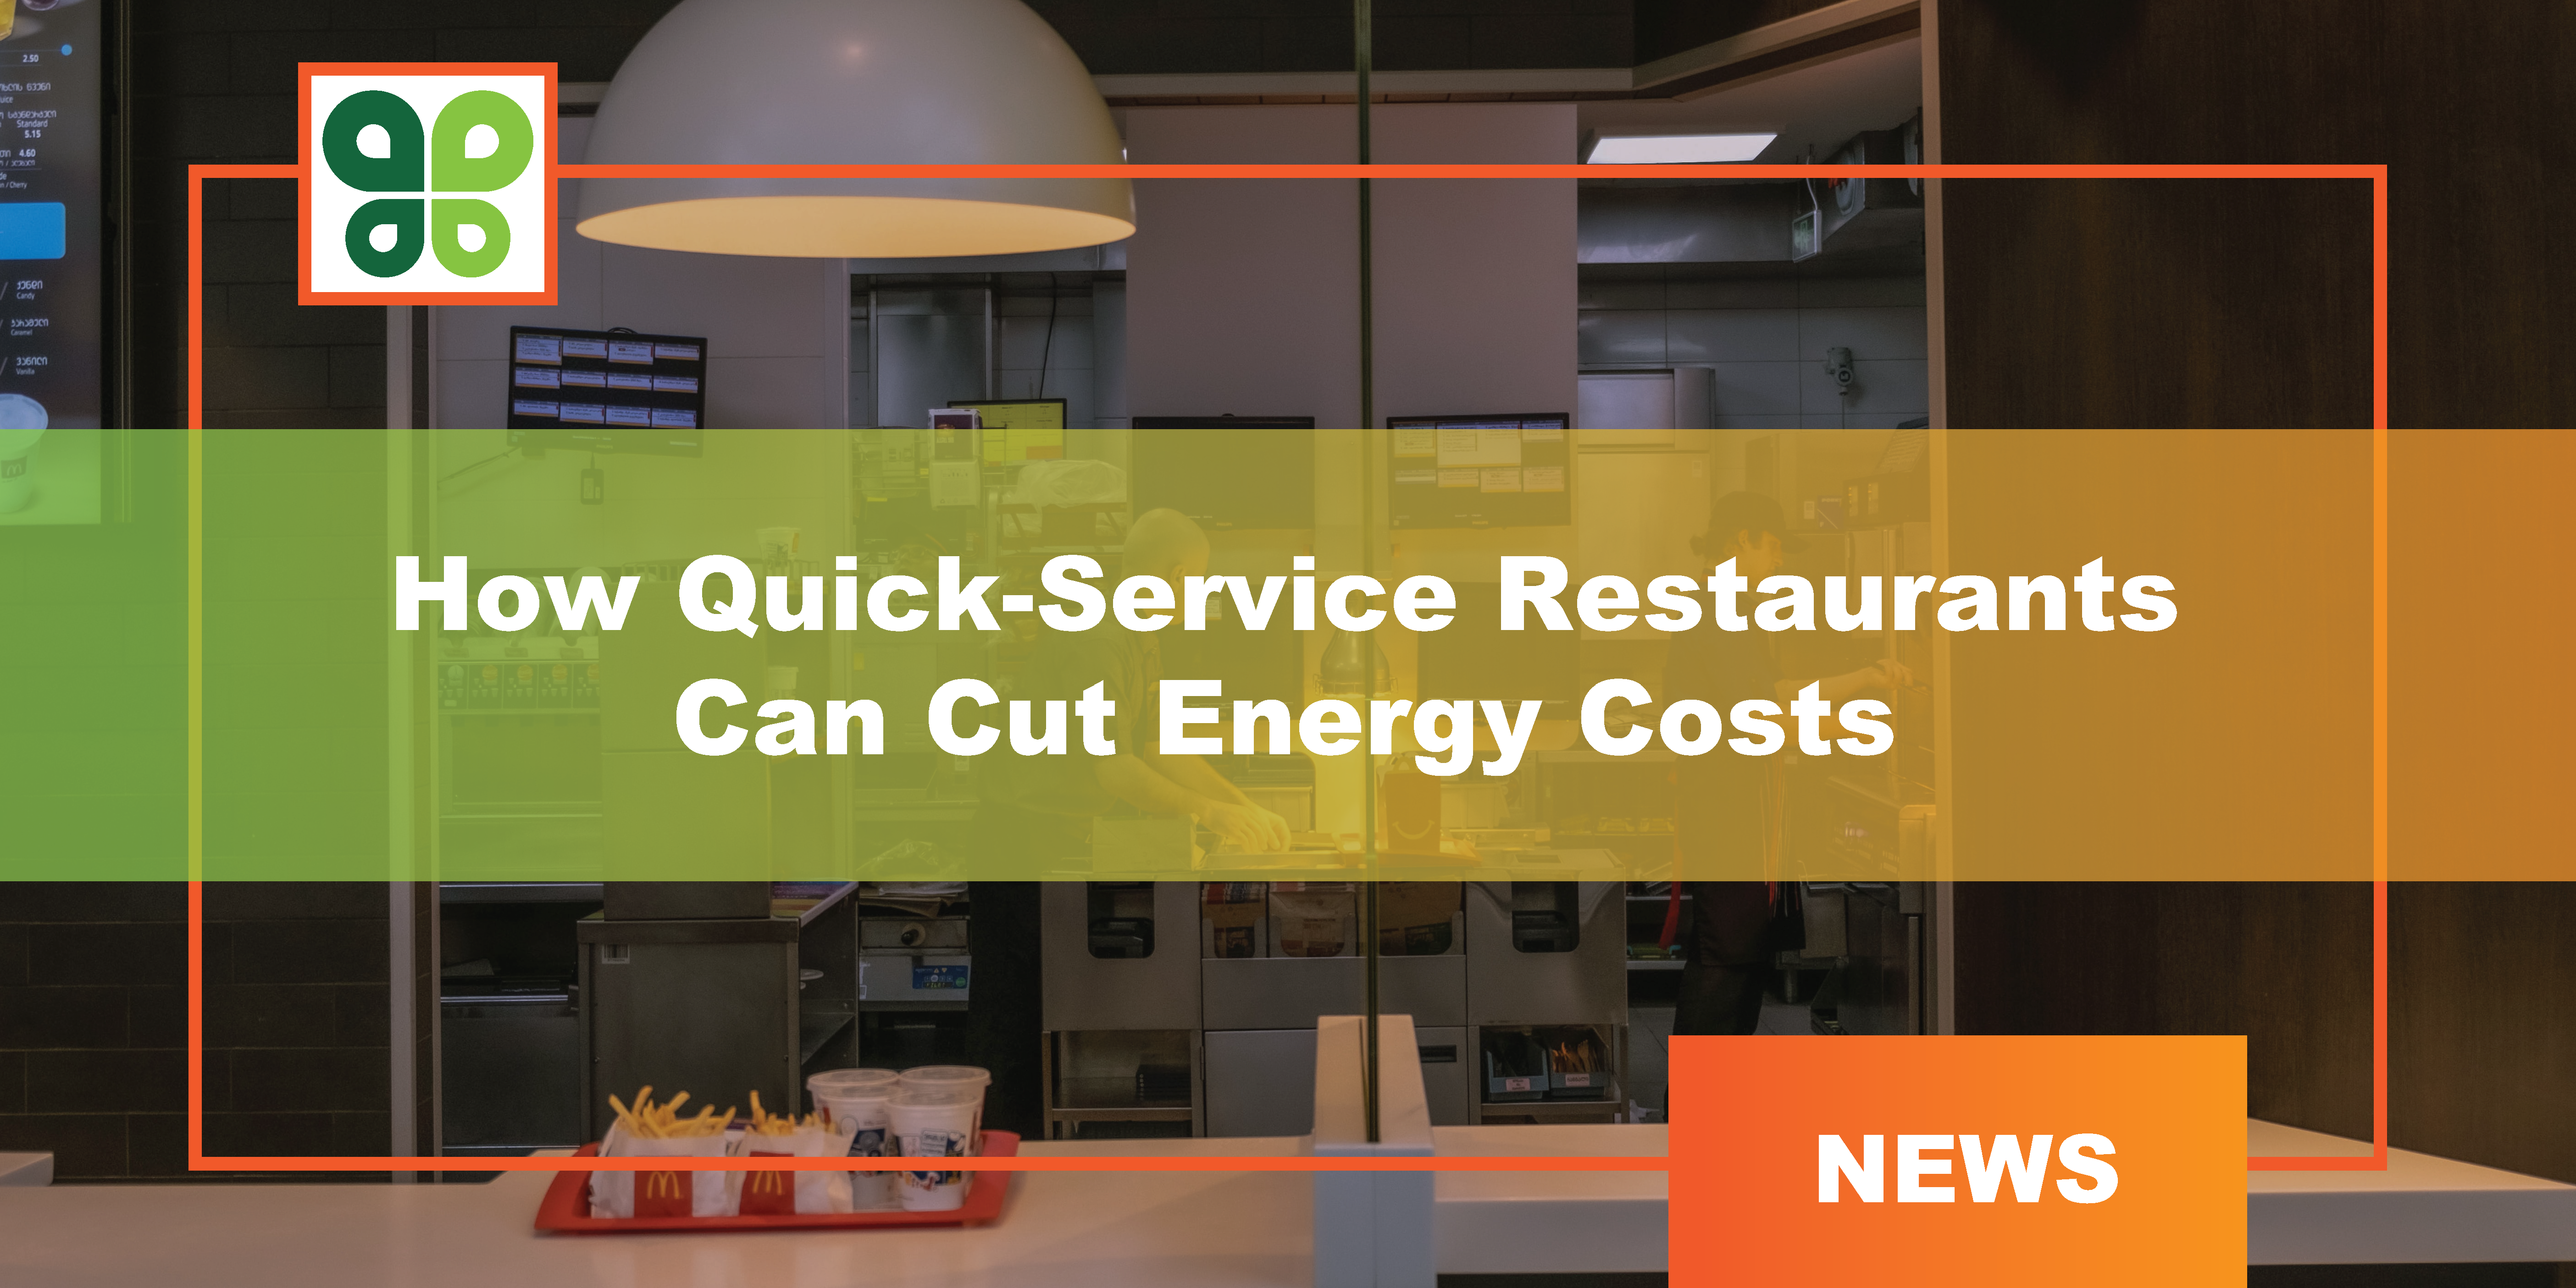 How Quick-Service Restaurants Can Cut Energy Costs